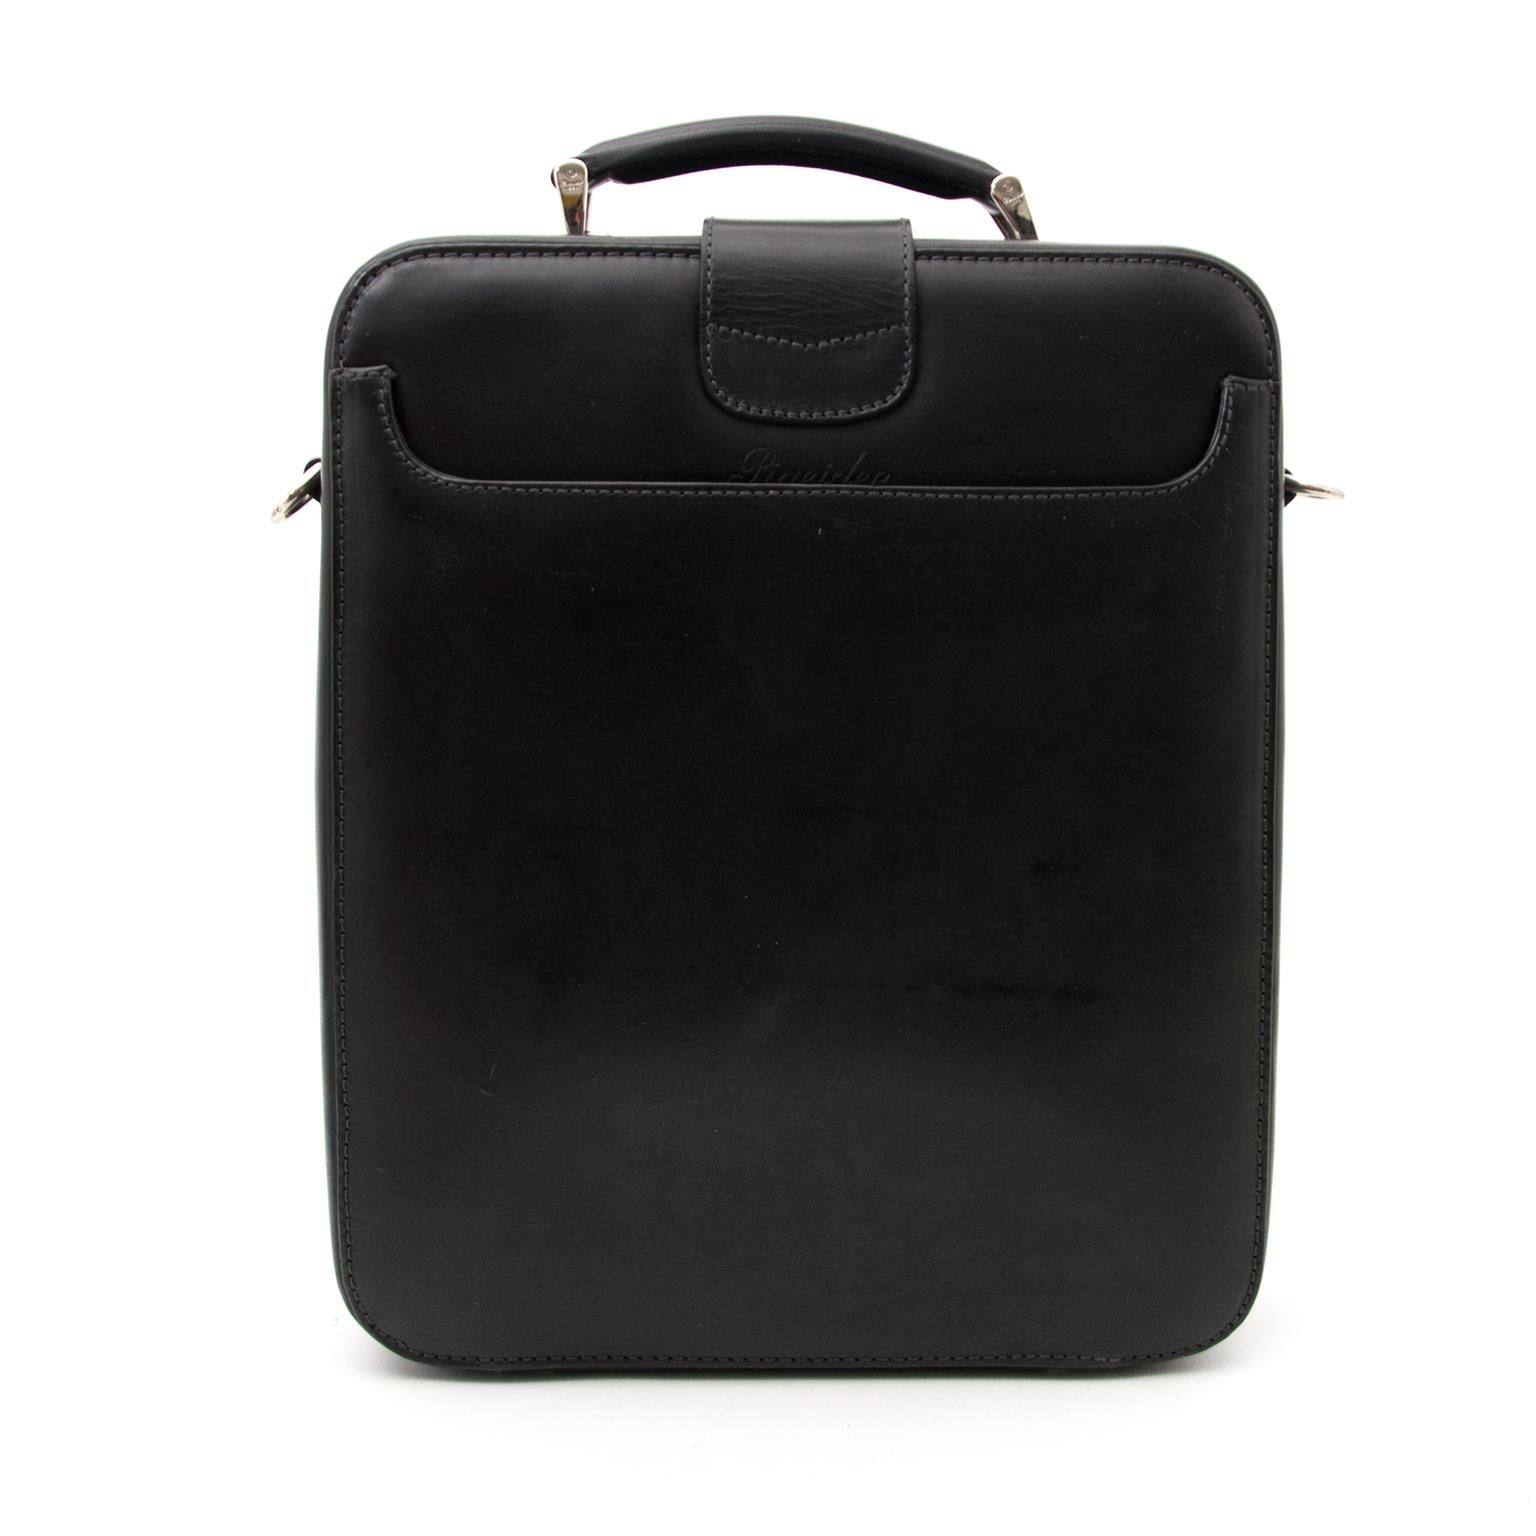 Good preloved condition

Estimated retail price: 2000 EUR

Pineider Power Elegance Black Leather Laptop Briefcase

In the need for an elegant yet practical luxury laptop briefcase? This Pineider Power Elegance Black Leather Laptop Briefcase is the